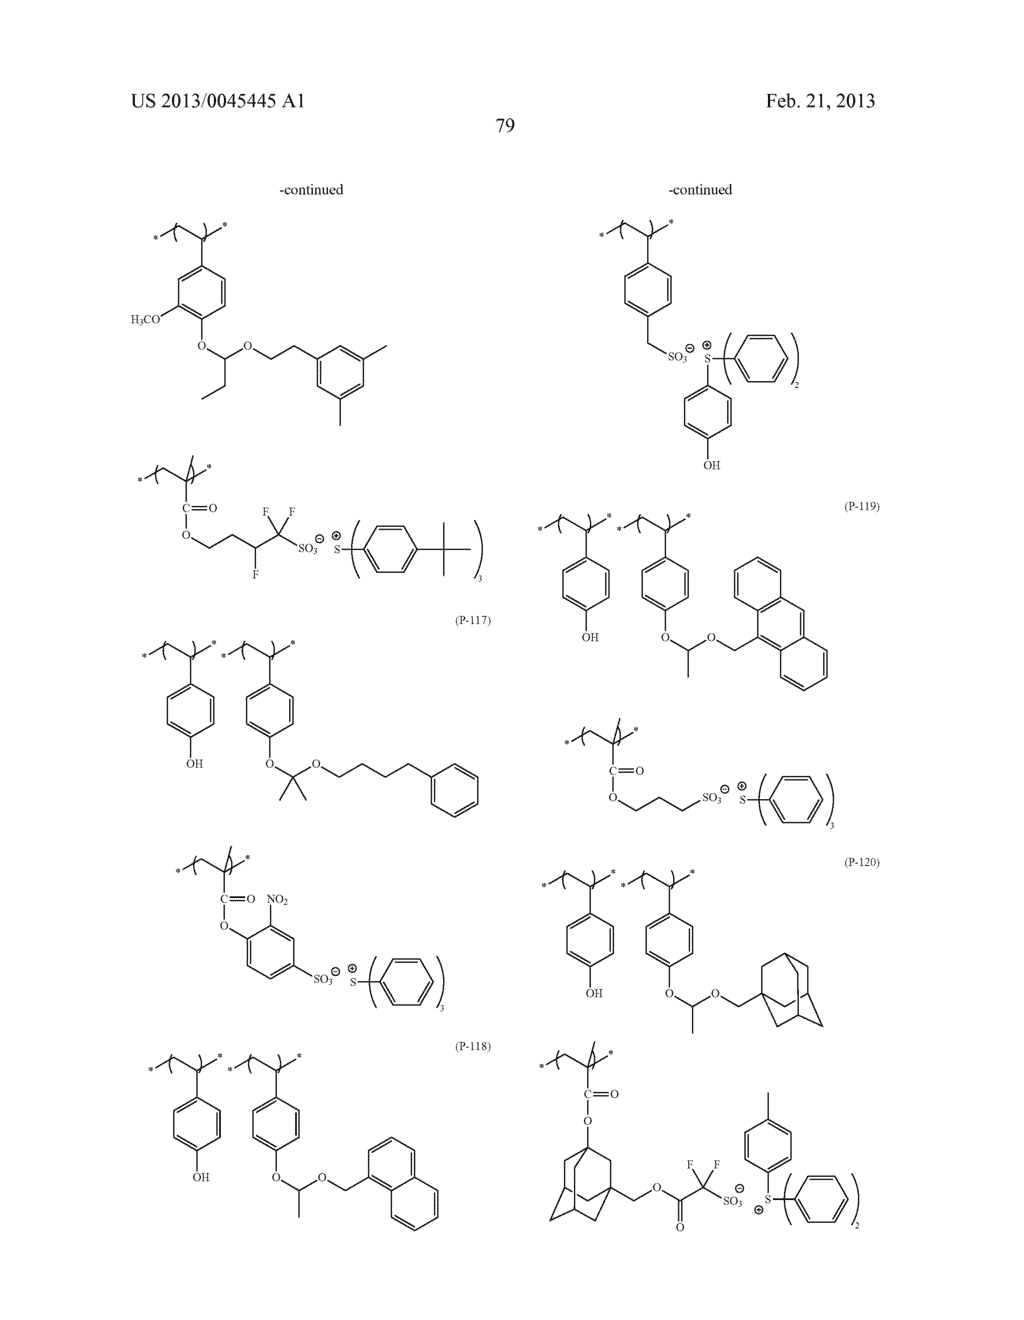 ACTINIC-RAY- OR RADIATION-SENSITIVE RESIN COMPOSITION, ACTINIC-RAY- OR     RADIATION-SENSITIVE RESIN FILM THEREFROM AND METHOD OF FORMING PATTERN     USING THE COMPOSITION - diagram, schematic, and image 80